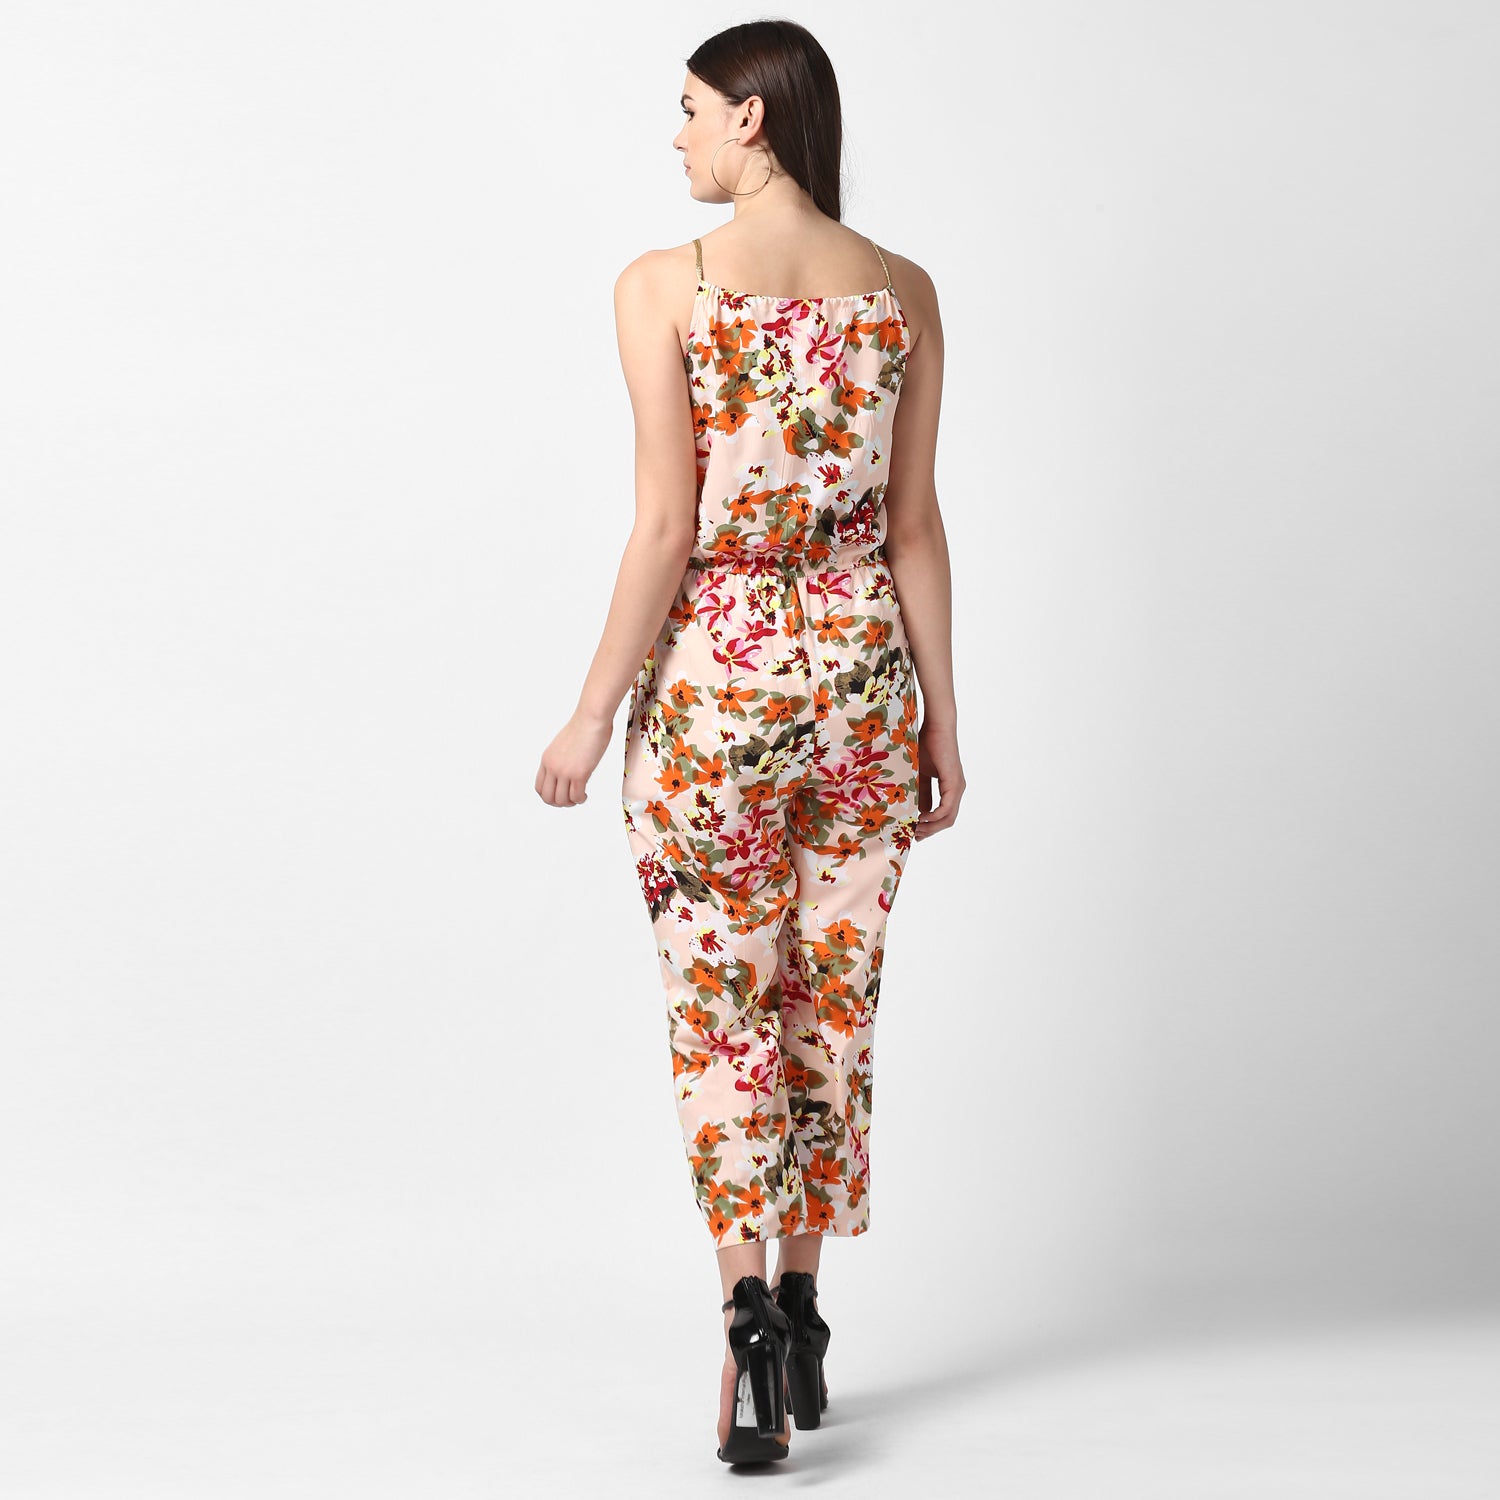 Women's Floral Printed Jumpsuit with Gold Lace Neckstrap - StyleStone